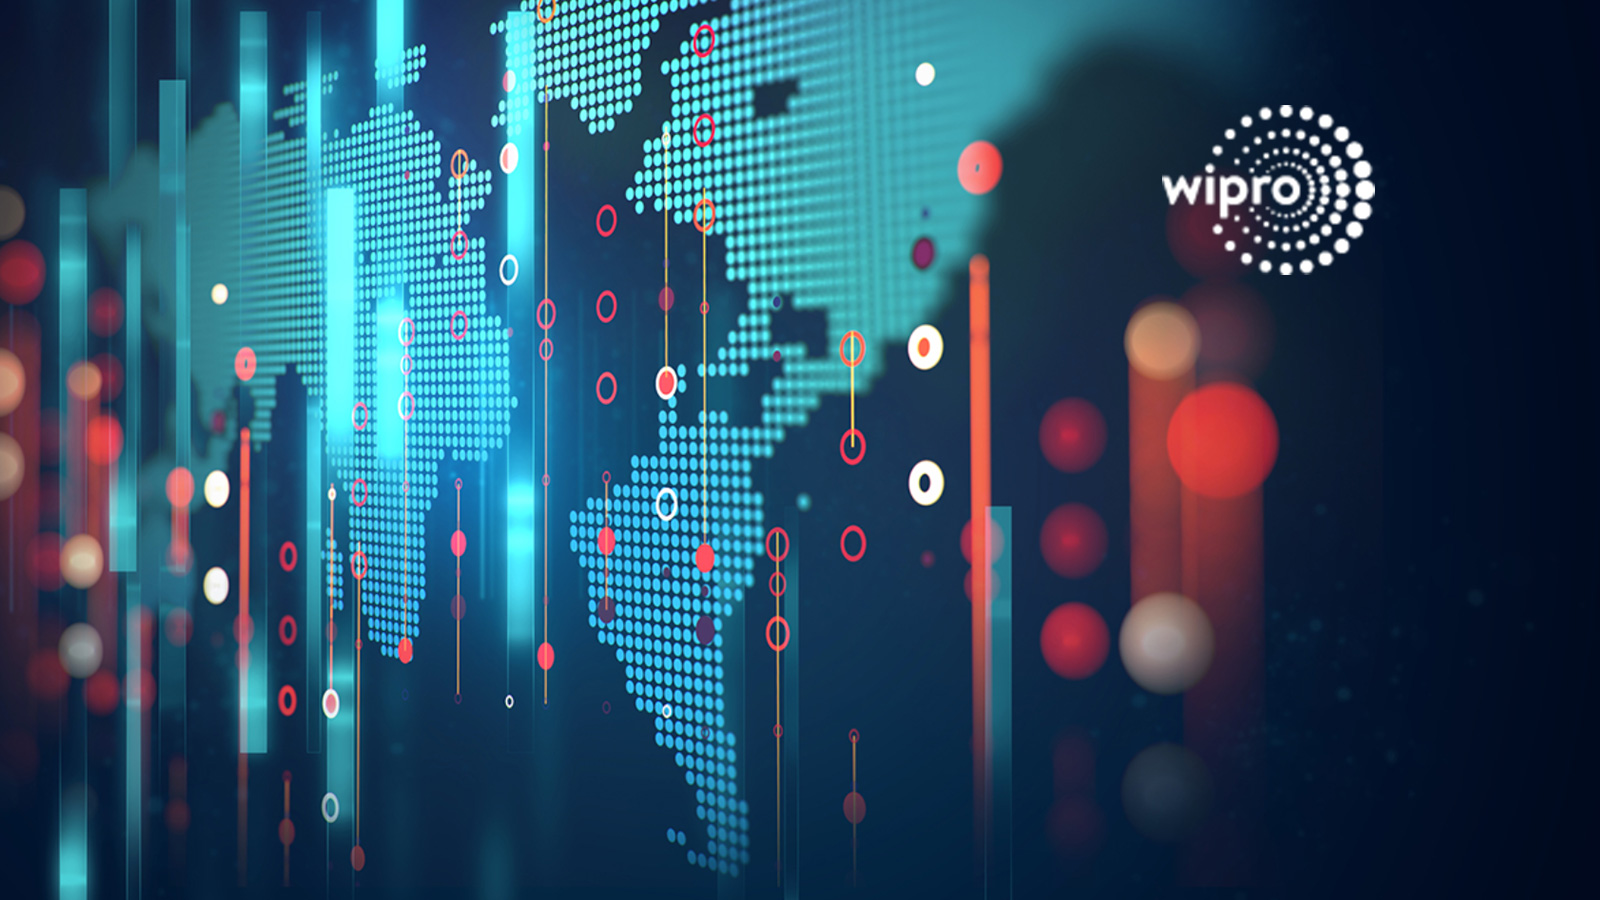 Wipro, R3 Build Blockchain Based Solution Prototype To Power Digital Currency In Thailand